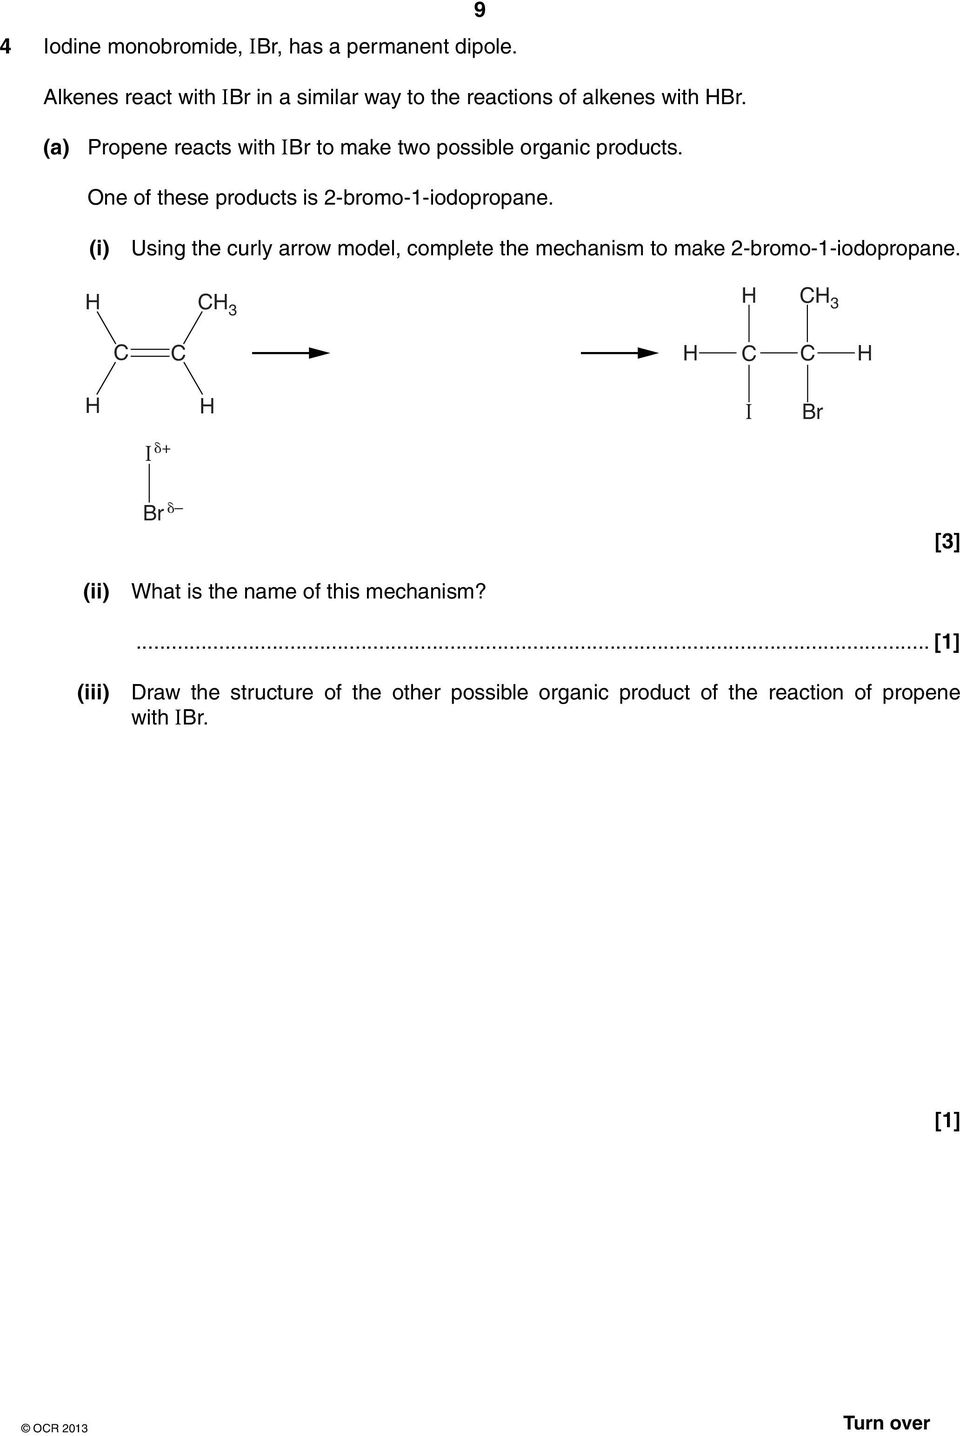 (i) Using the curly arrow model, complete the mechanism to make 2-bromo-1-iodopropane.